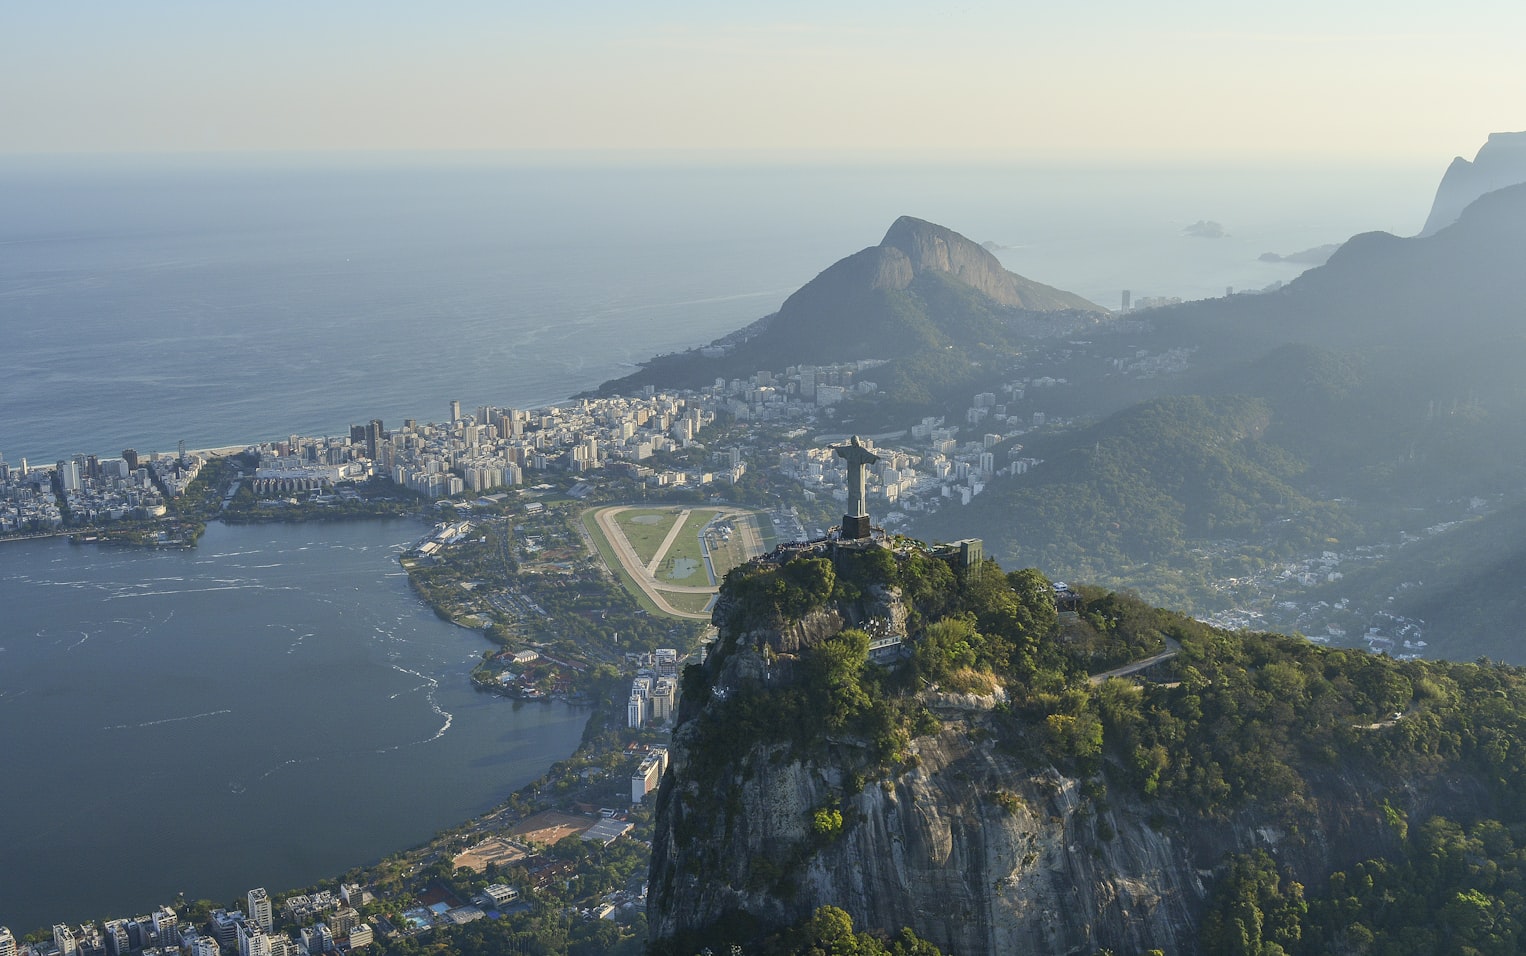 The Christ the Redeemer statue in Rio de Janeiro is not made of marble